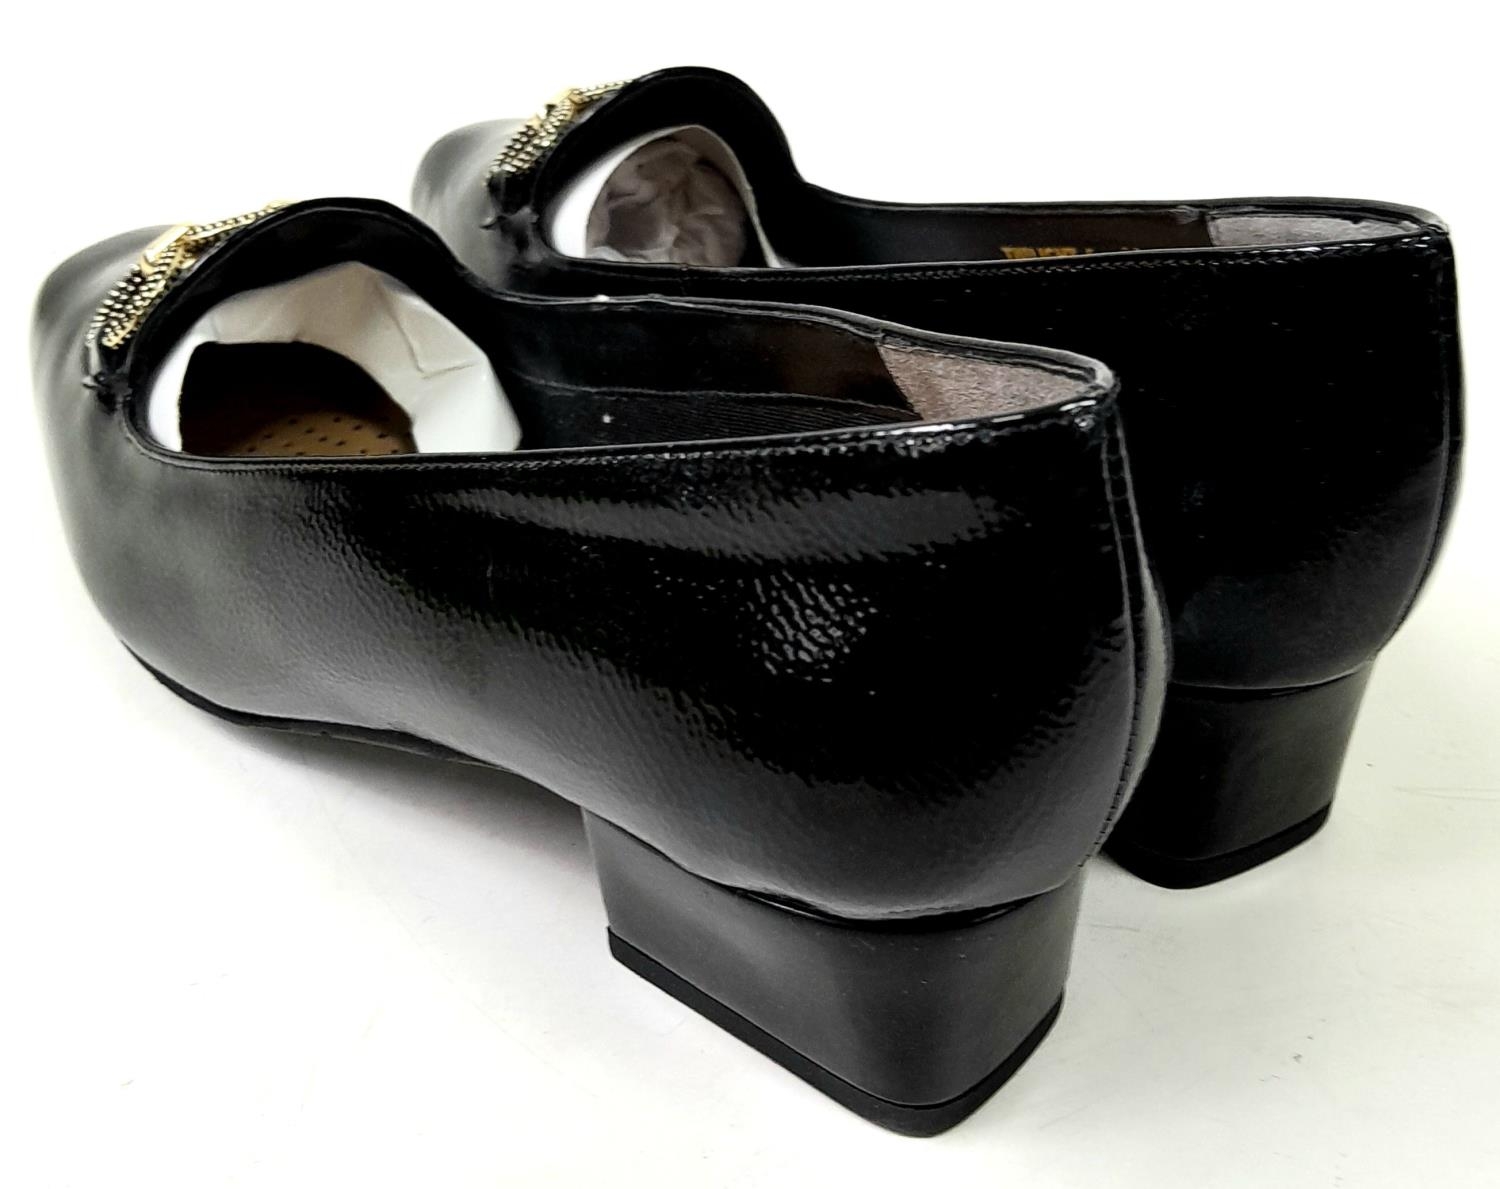 An Unused pair of "Twilight" lacquered ladies shoes by Van Dal, Size 5 ,1.5" heel. In box. - Image 6 of 10